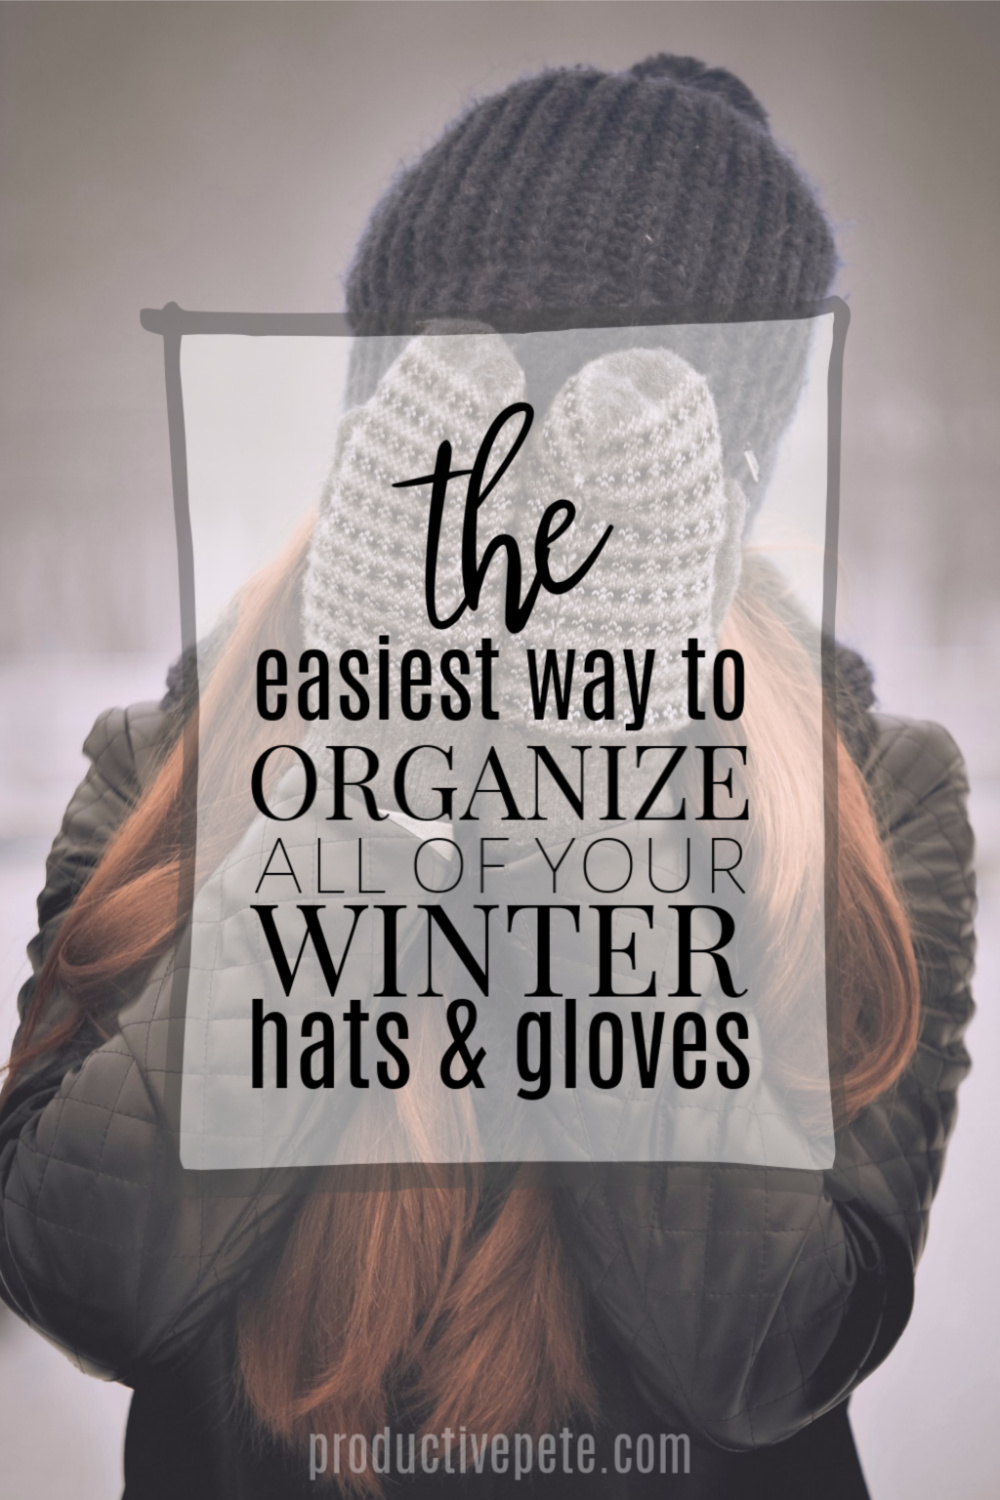 How to Organize all your Winter Accessories Productive Pete